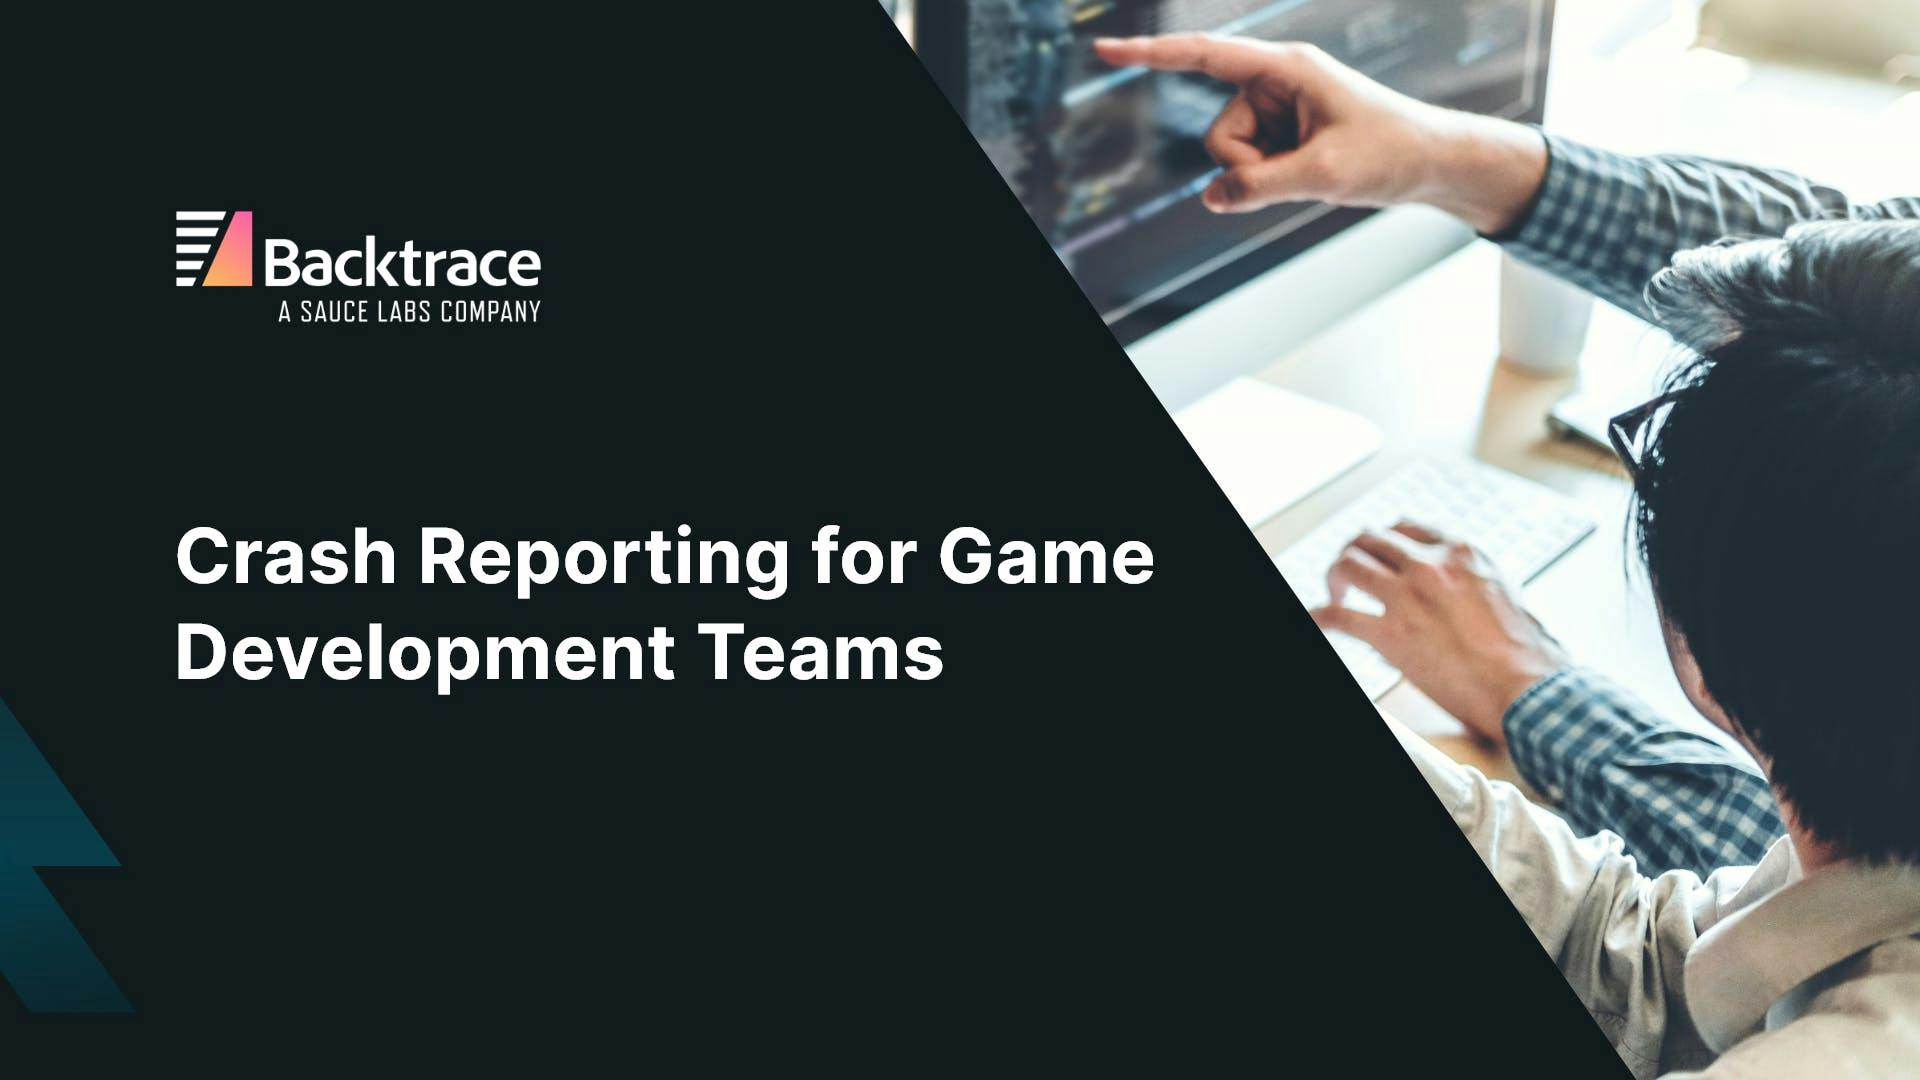 Thumbnail image for blog post: Crash Reporting for Game Development Teams